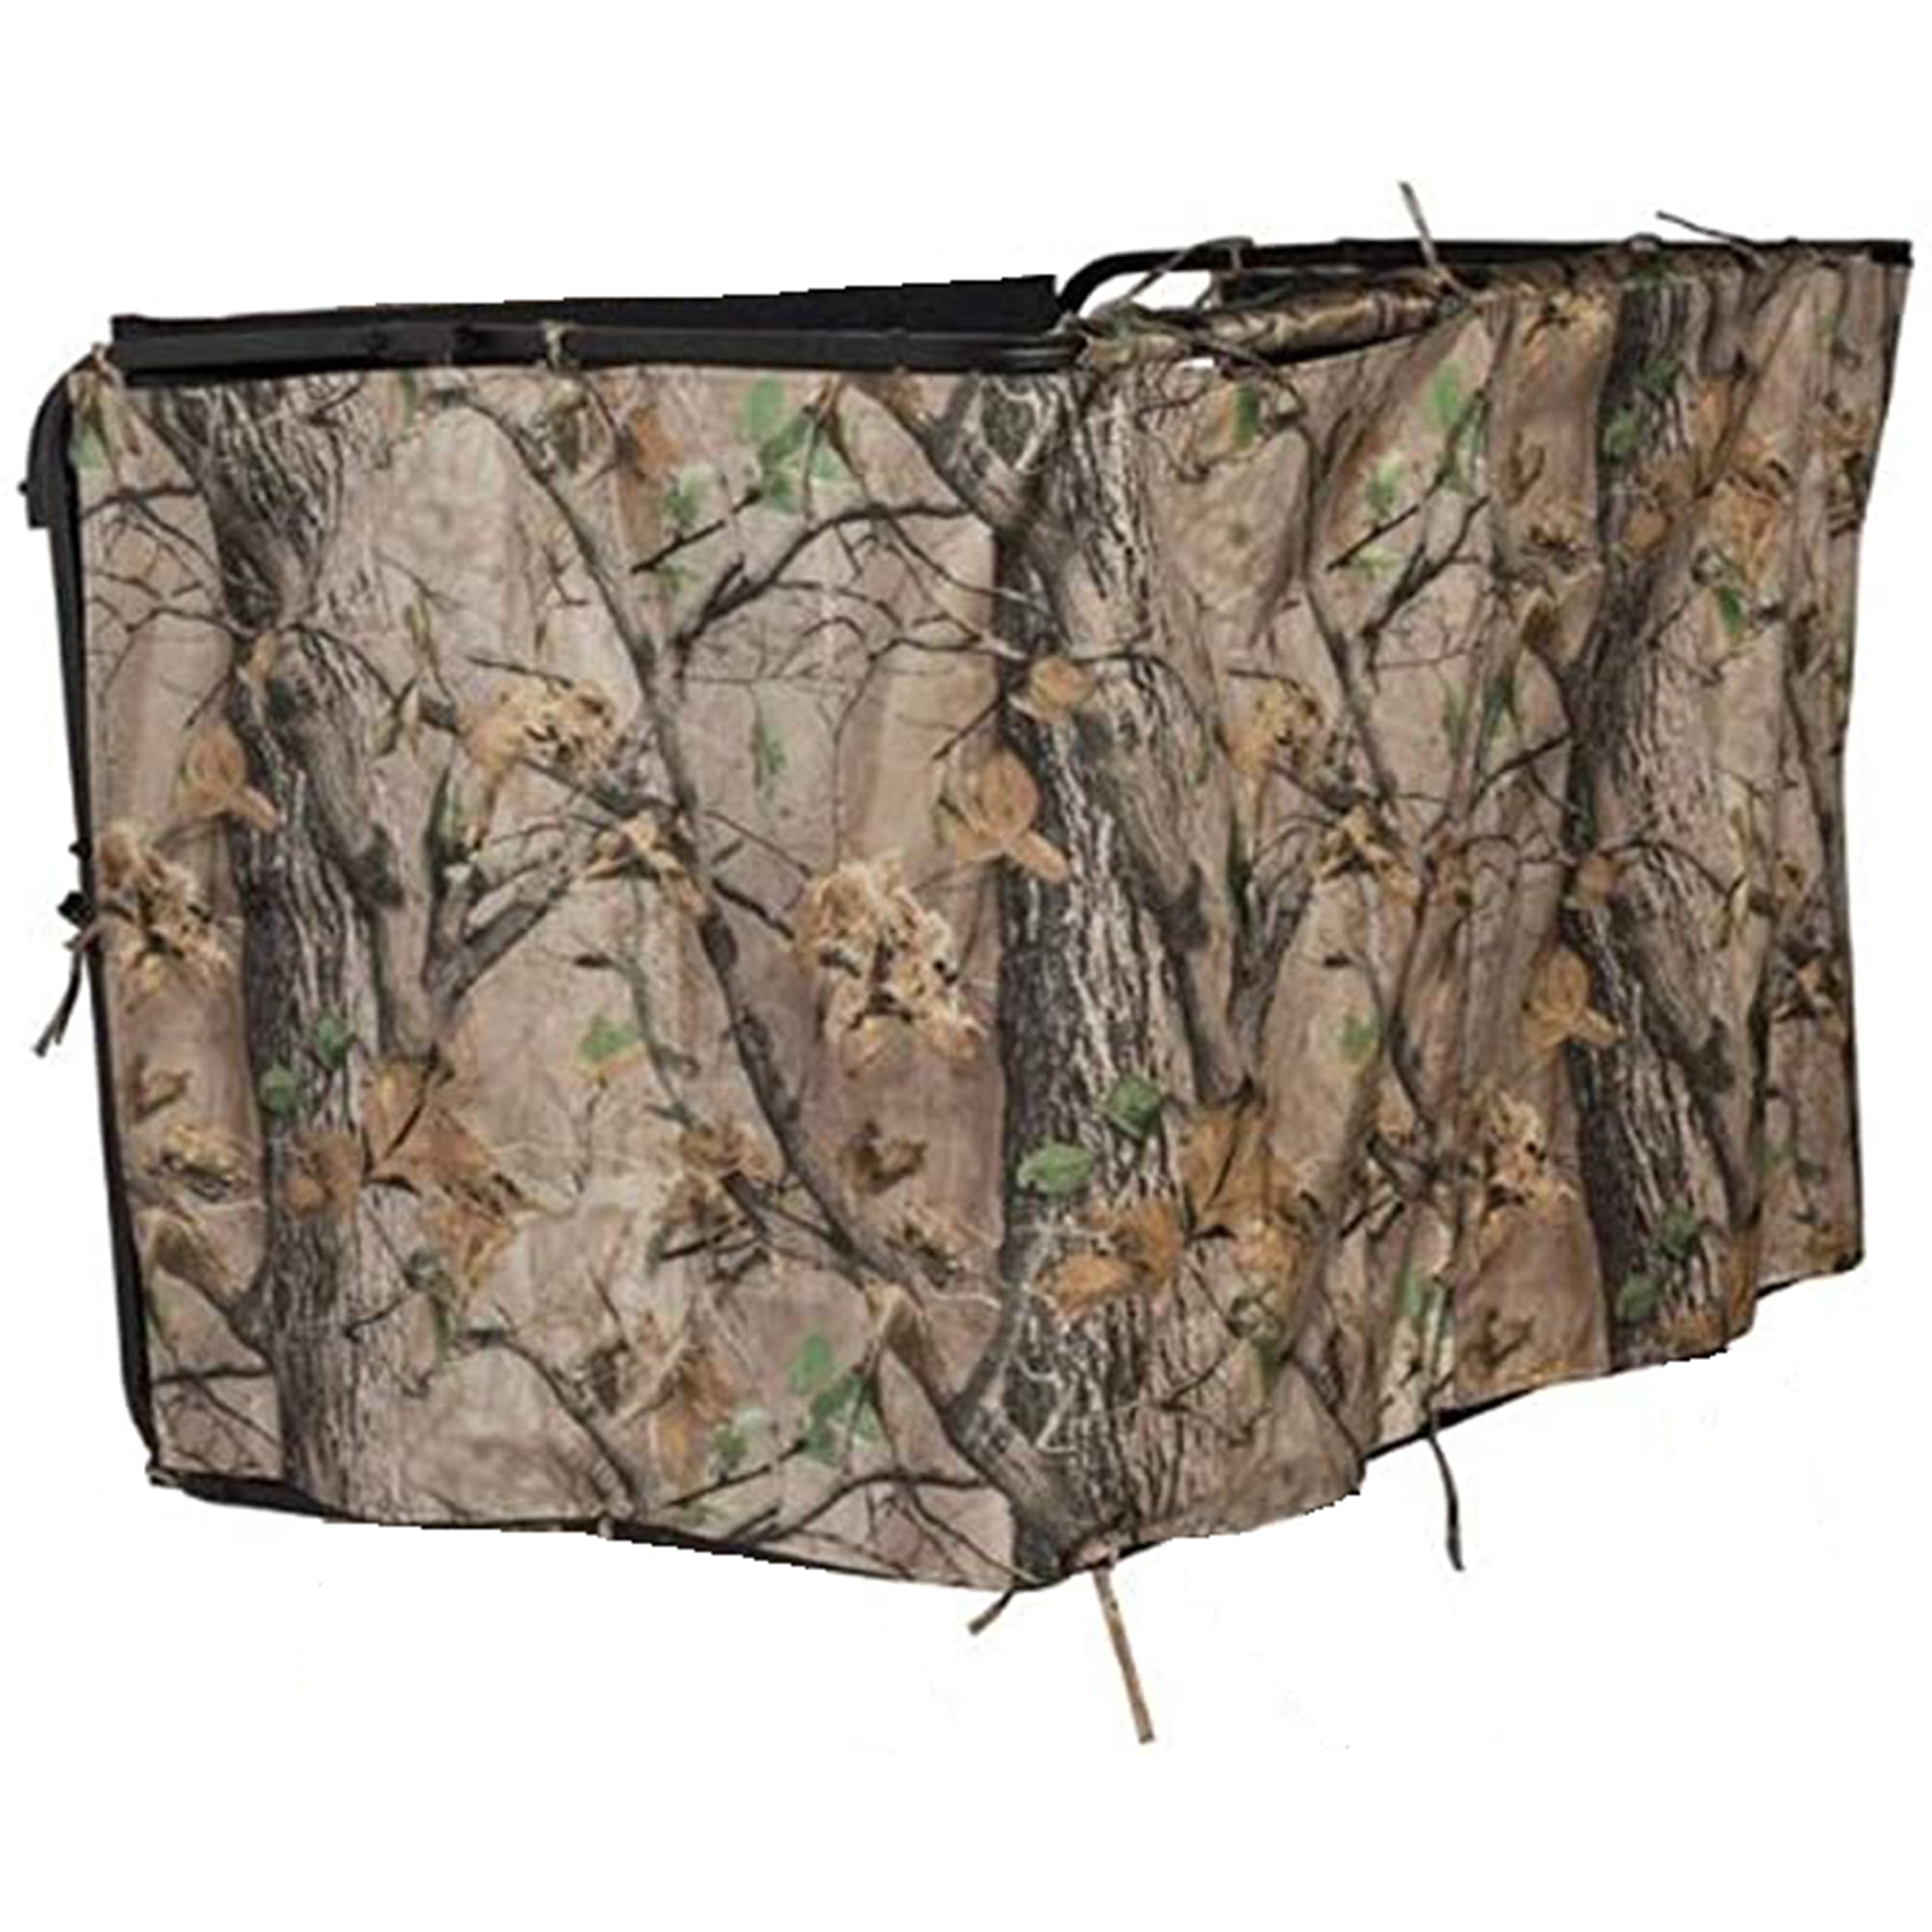 Ladder Tree Stand Camo Cover 2-Man Hunting Blind Shield Zipper Entry Deer Hunter 